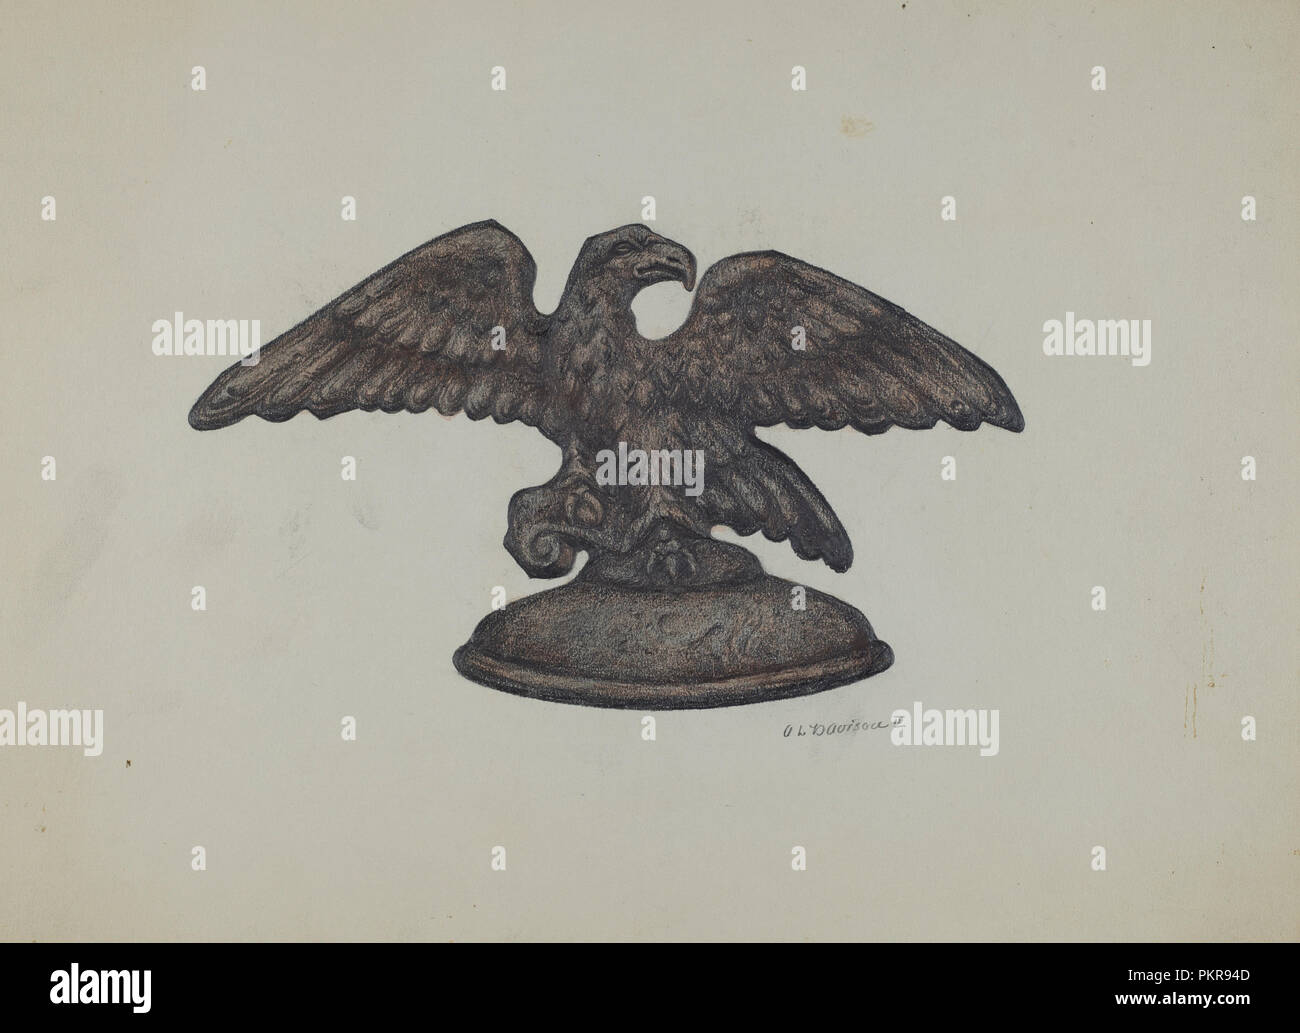 Cast Iron Eagle. Dated: c. 1937. Dimensions: overall: 24.6 x 35.8 cm (9 11/16 x 14 1/8 in.). Medium: graphite and colored pencil on paperboard. Museum: National Gallery of Art, Washington DC. Author: Austin L. Davison. Stock Photo